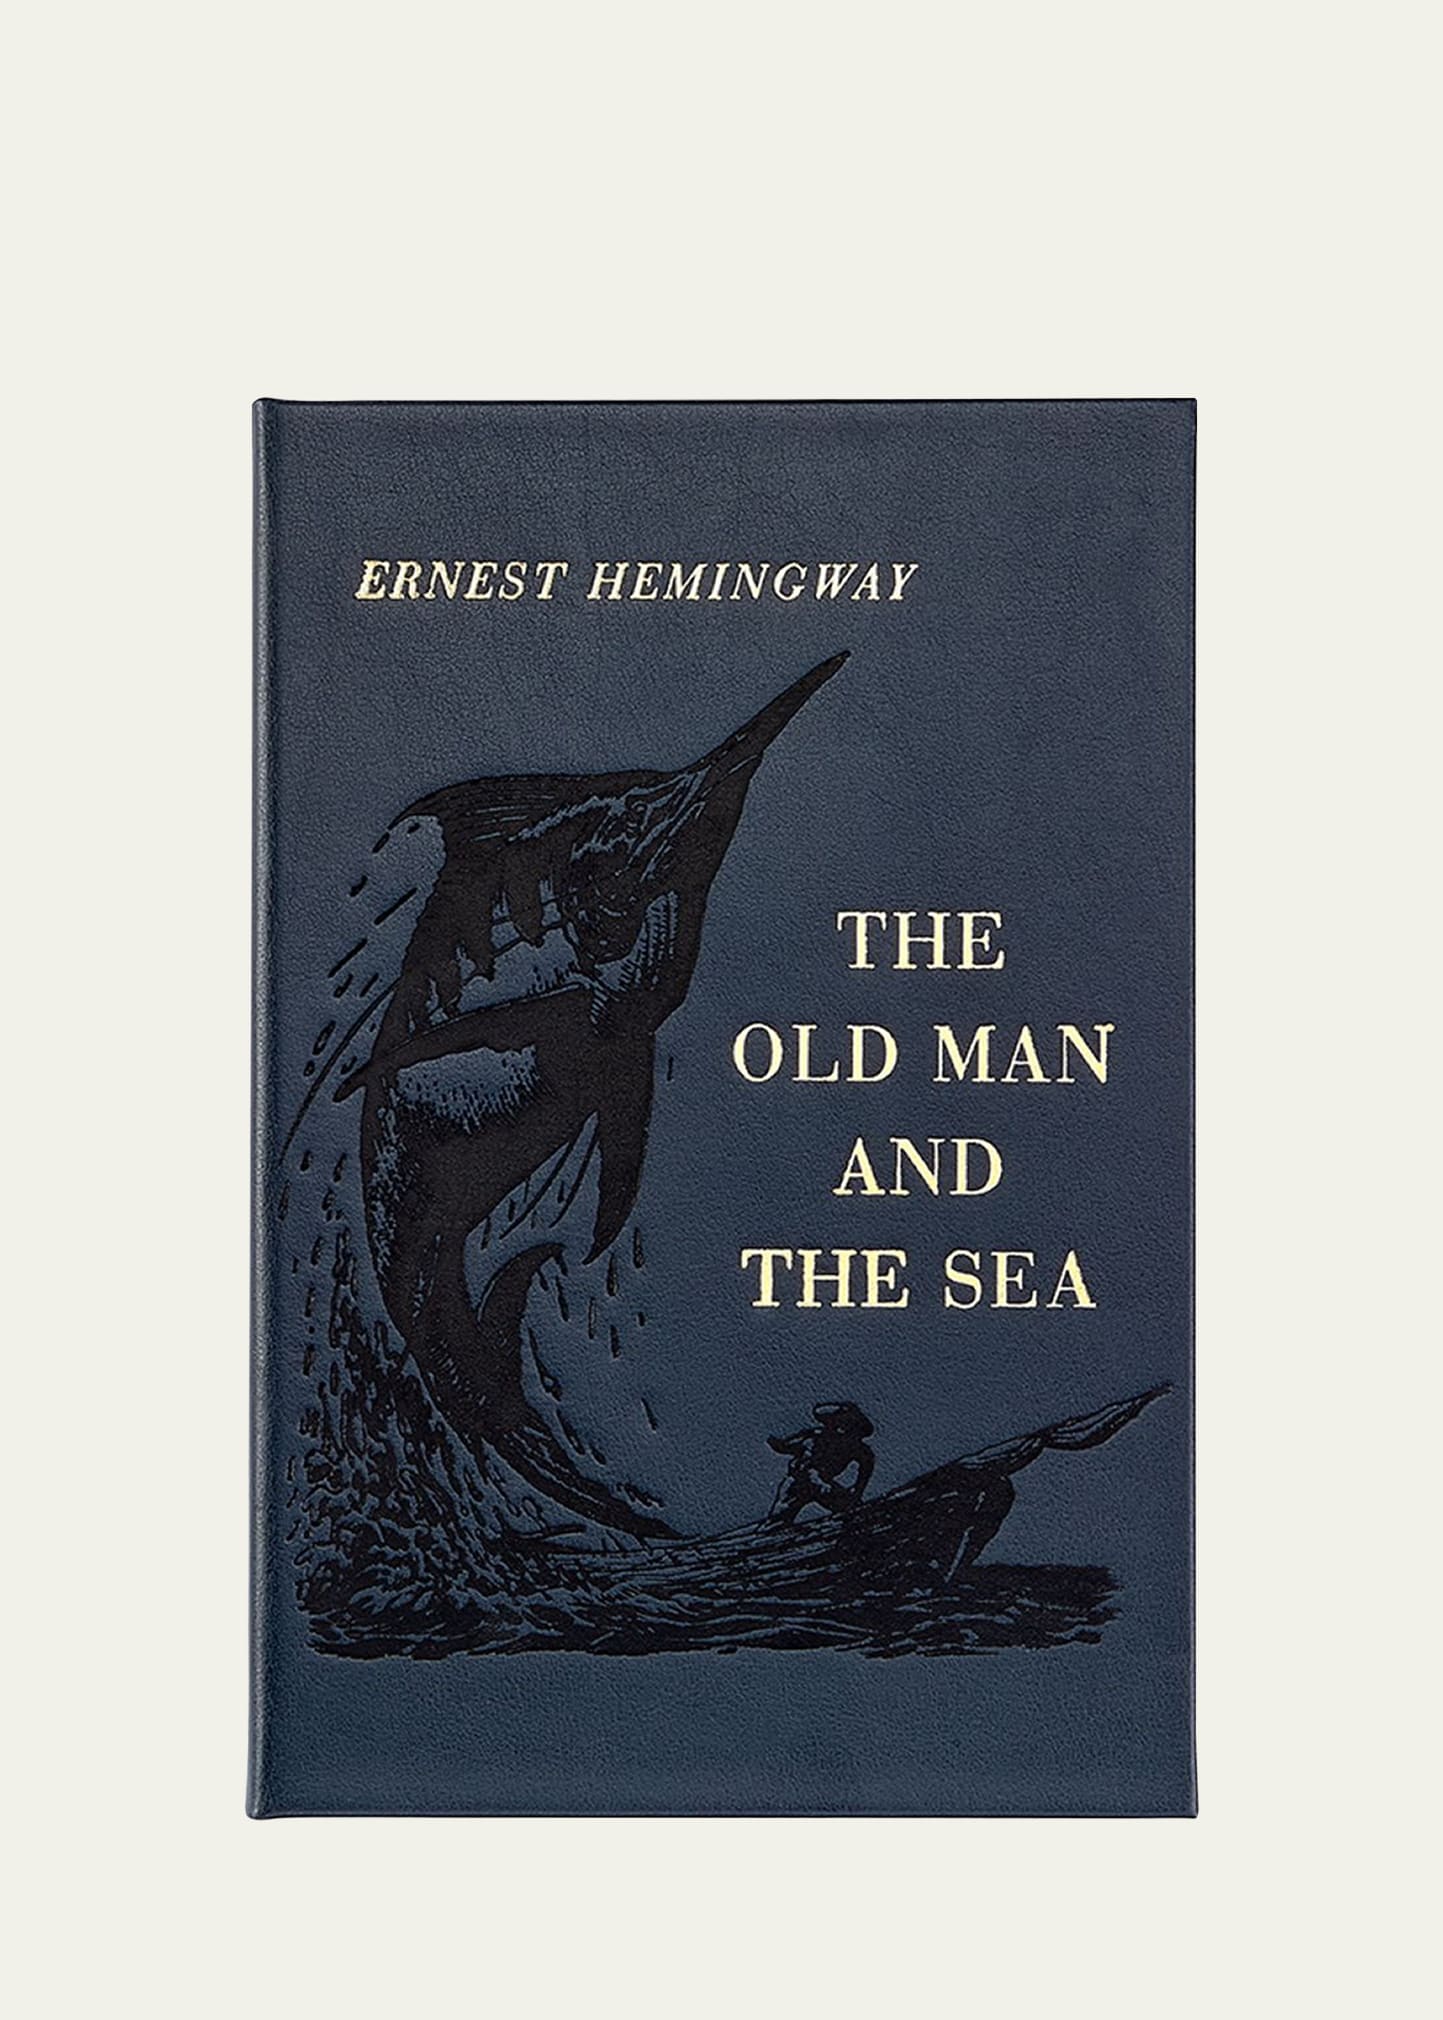 The Old Man and the Sea Book by Ernest Hemingway